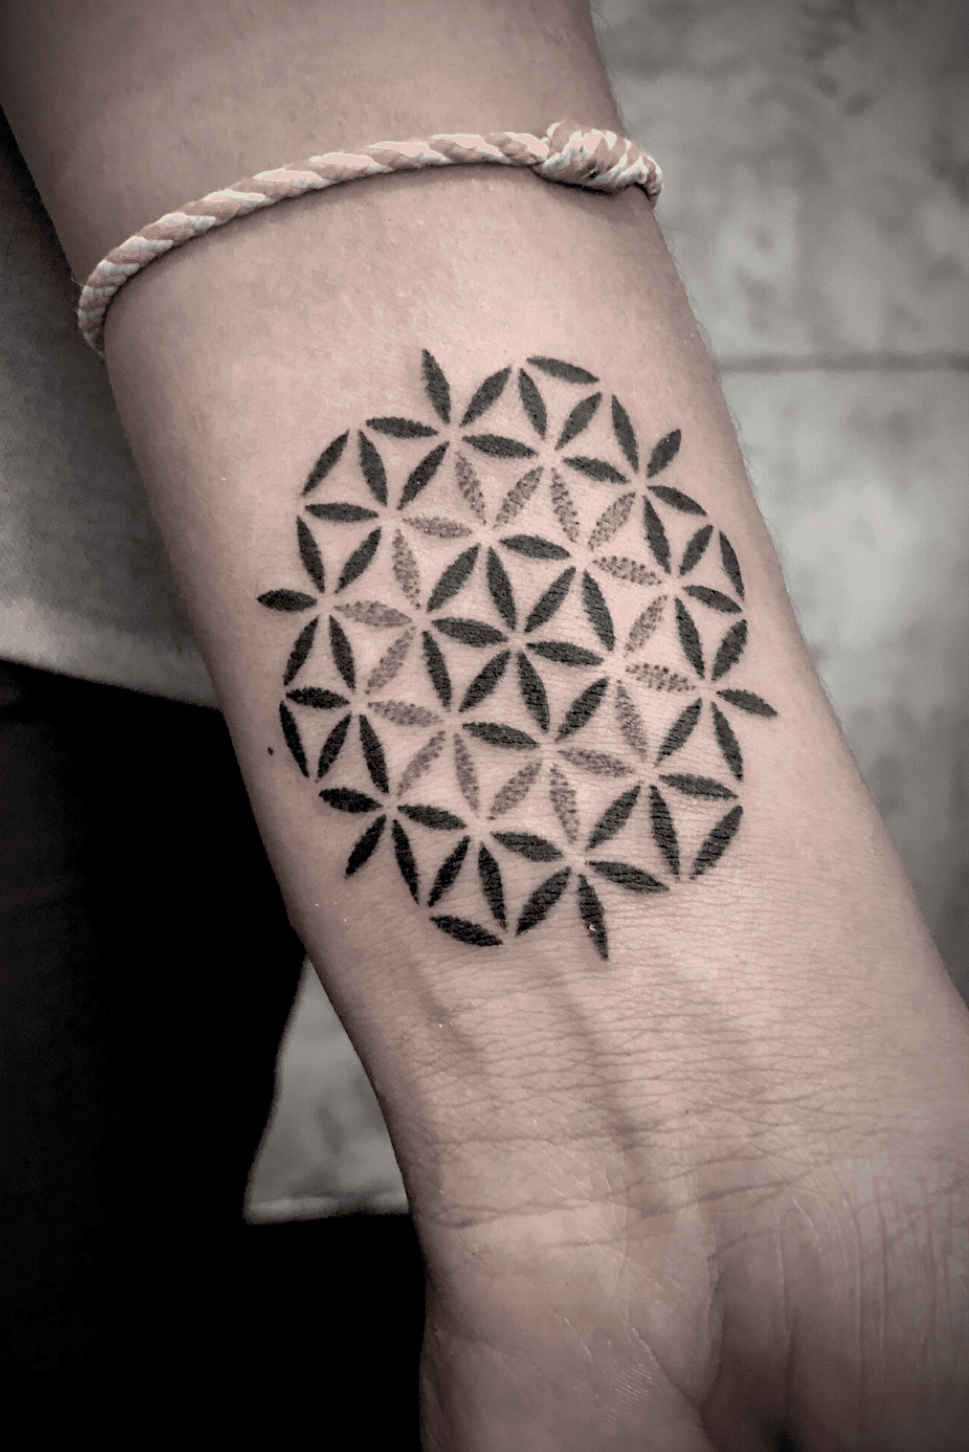 Top 30 Gorgeous Flower Of Life Tattoo Design Ideas 2021 Updated  Flower  of life tattoo Life tattoos Tattoos